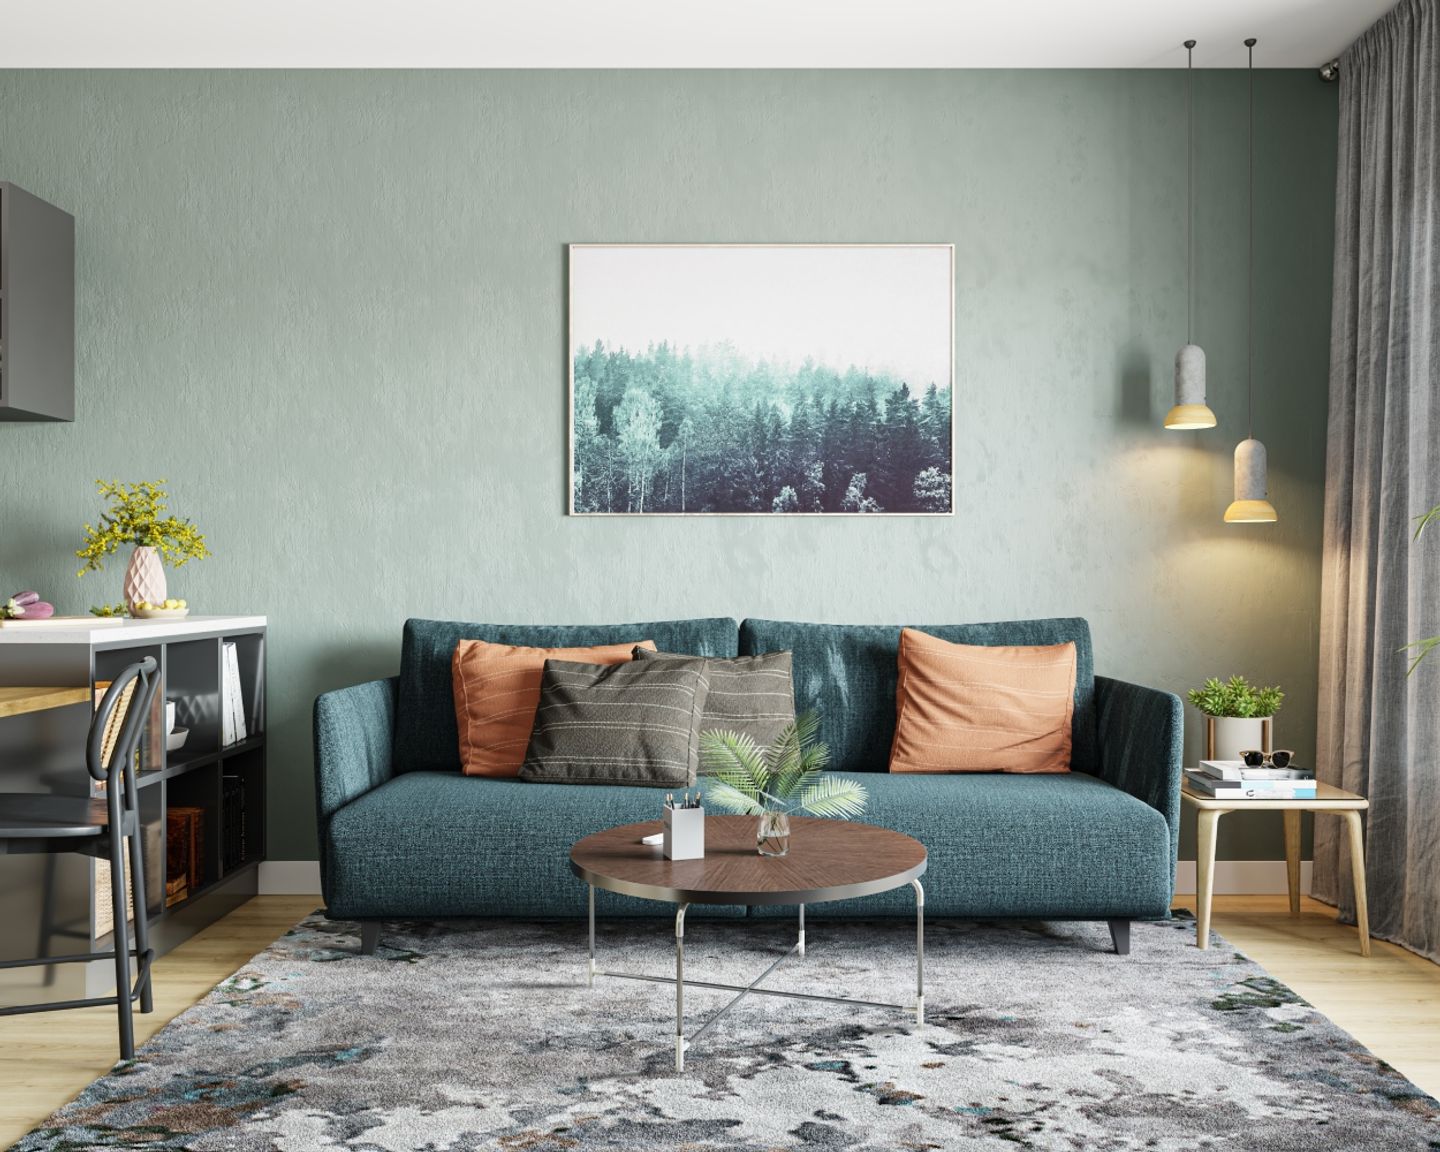 Pistachio Green Wall Paint For Living Rooms - Livspace